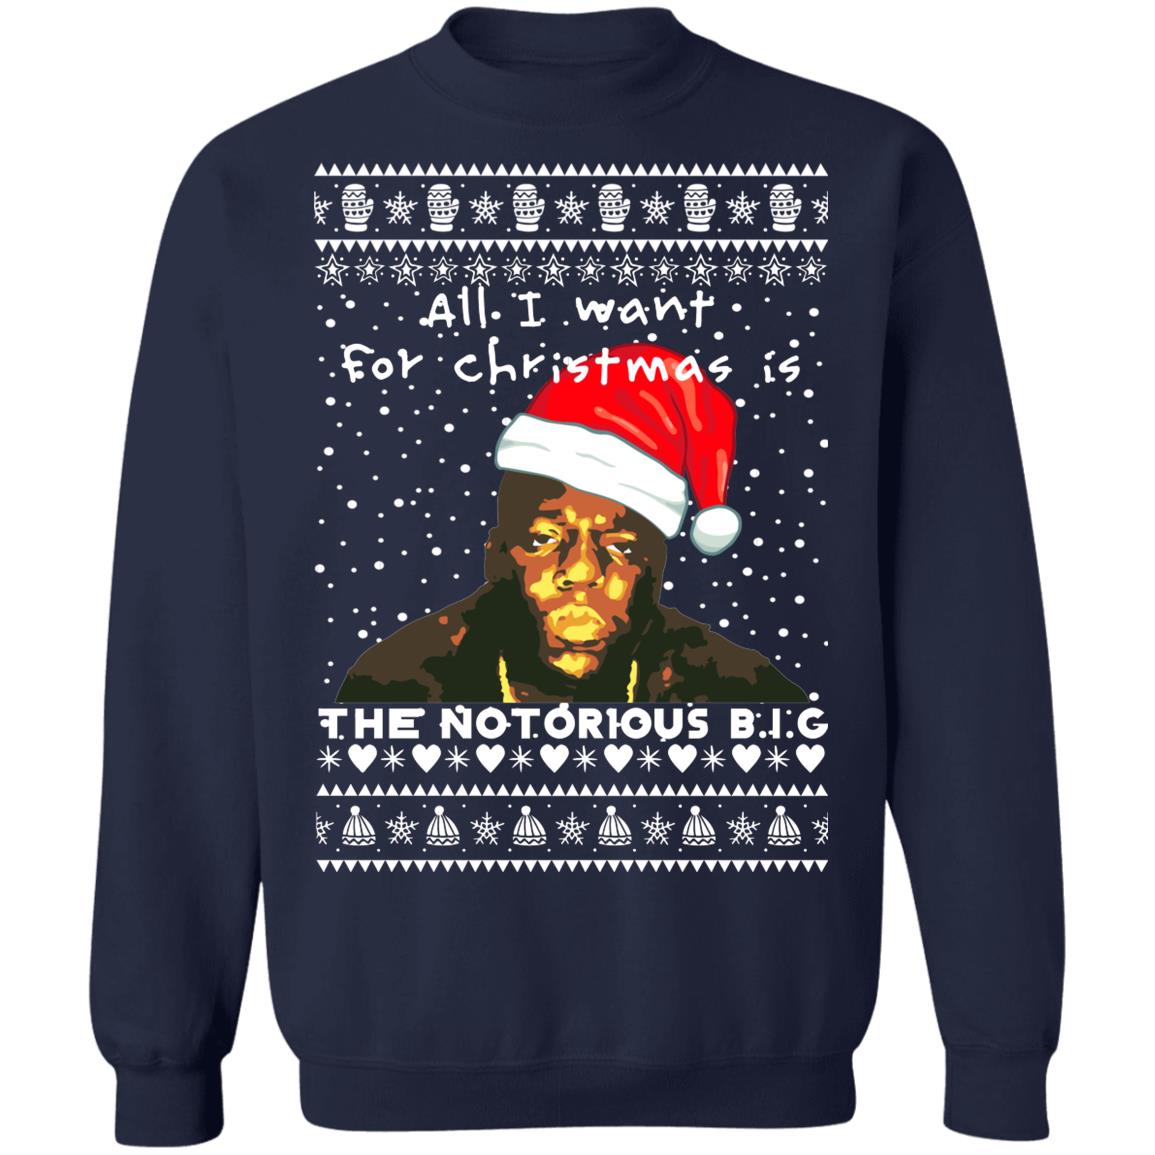 Hallo Historicus Monetair The Notorious B.I.G. Rapper Ugly Christmas Sweater Ls Hoodie - Q-Finder  Trending Design T Shirt